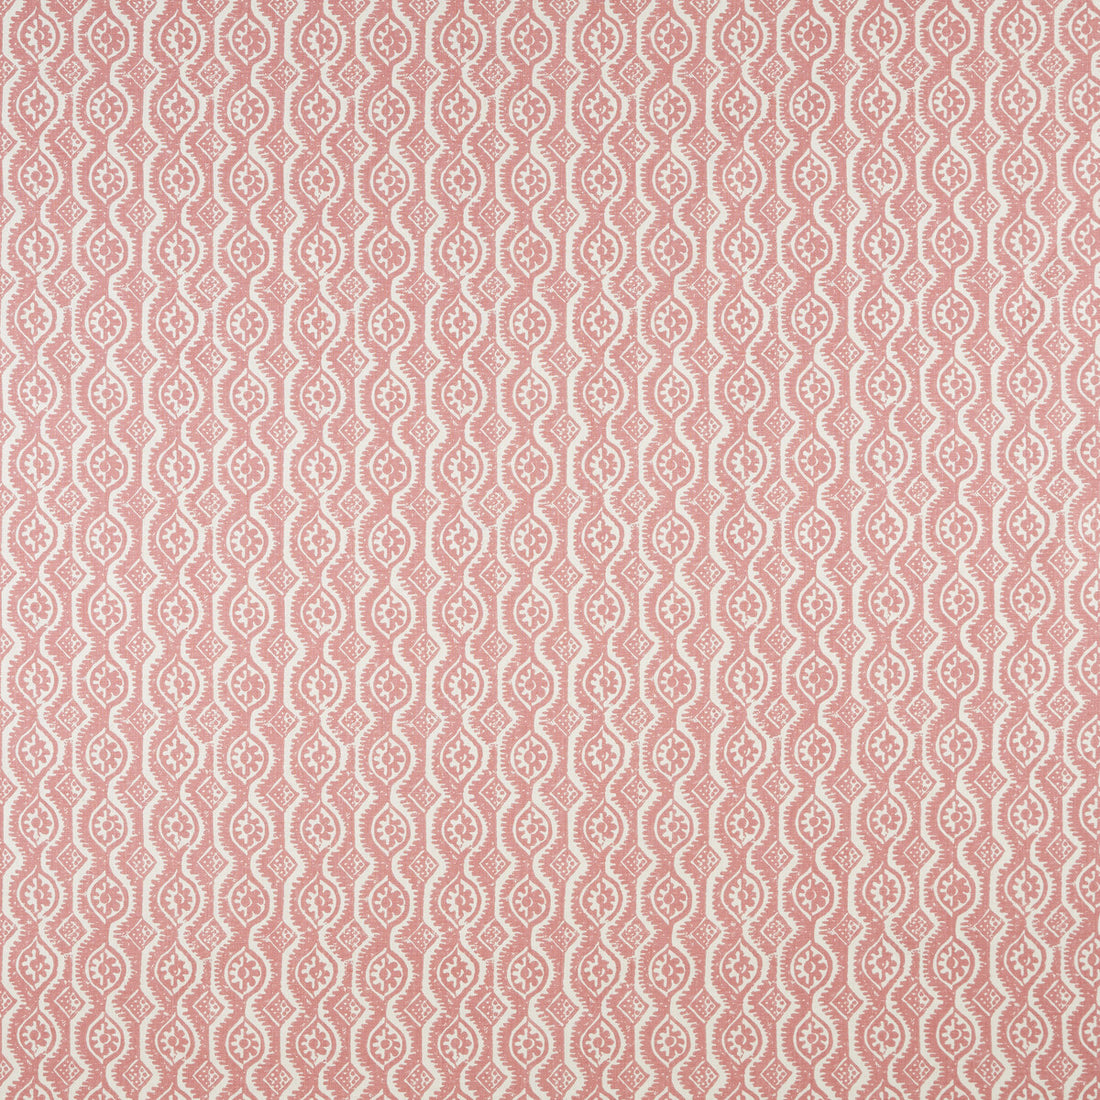 Small Damask fabric in pink color - pattern BFC-3642.7.0 - by Lee Jofa in the Blithfield collection